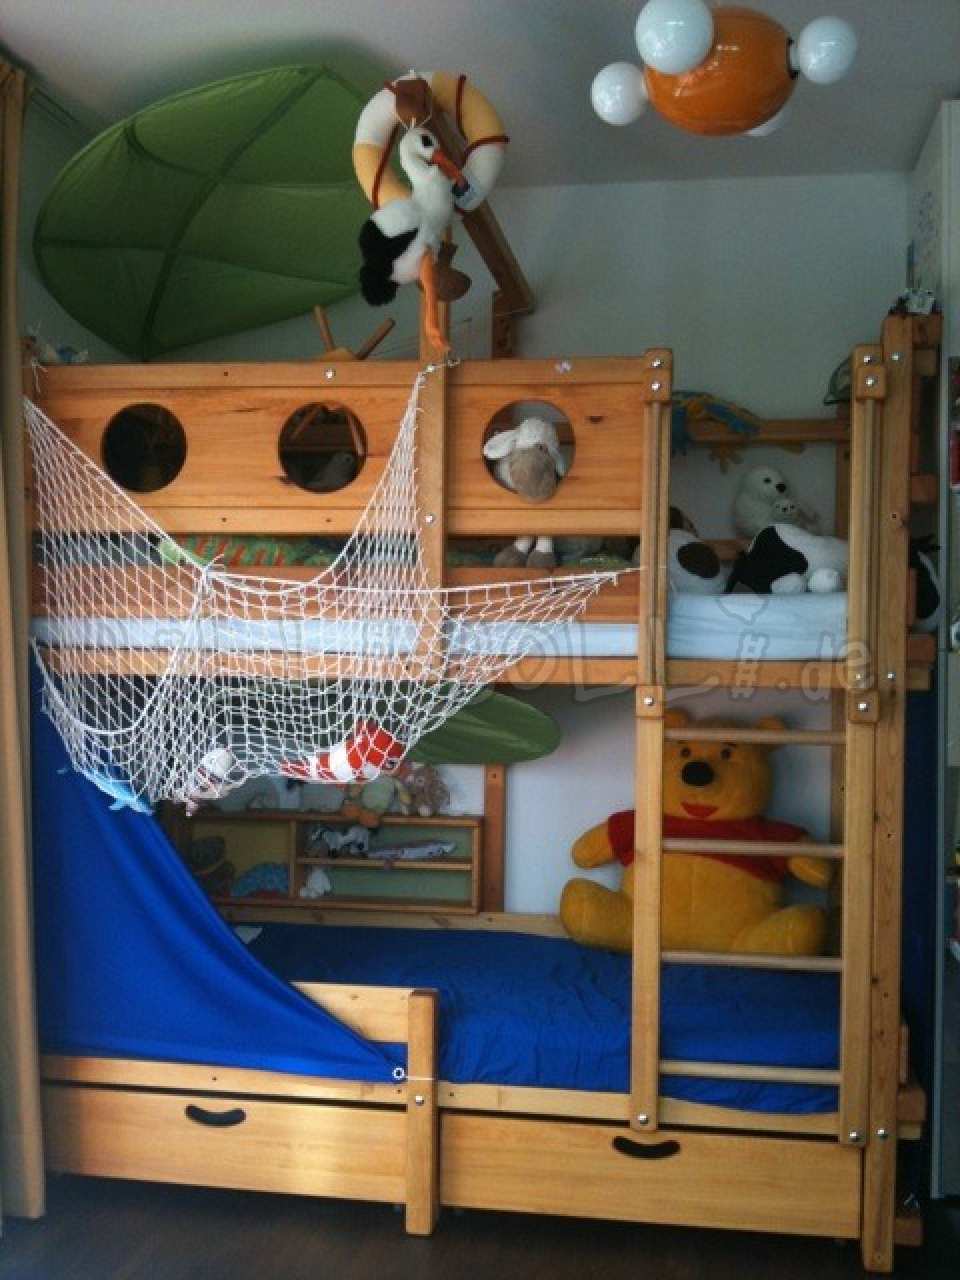 Billi-Bolli "Pirate" bunk bed, 90 x 200 cm, honey-coloured oiled pine (Category: second hand loft bed)